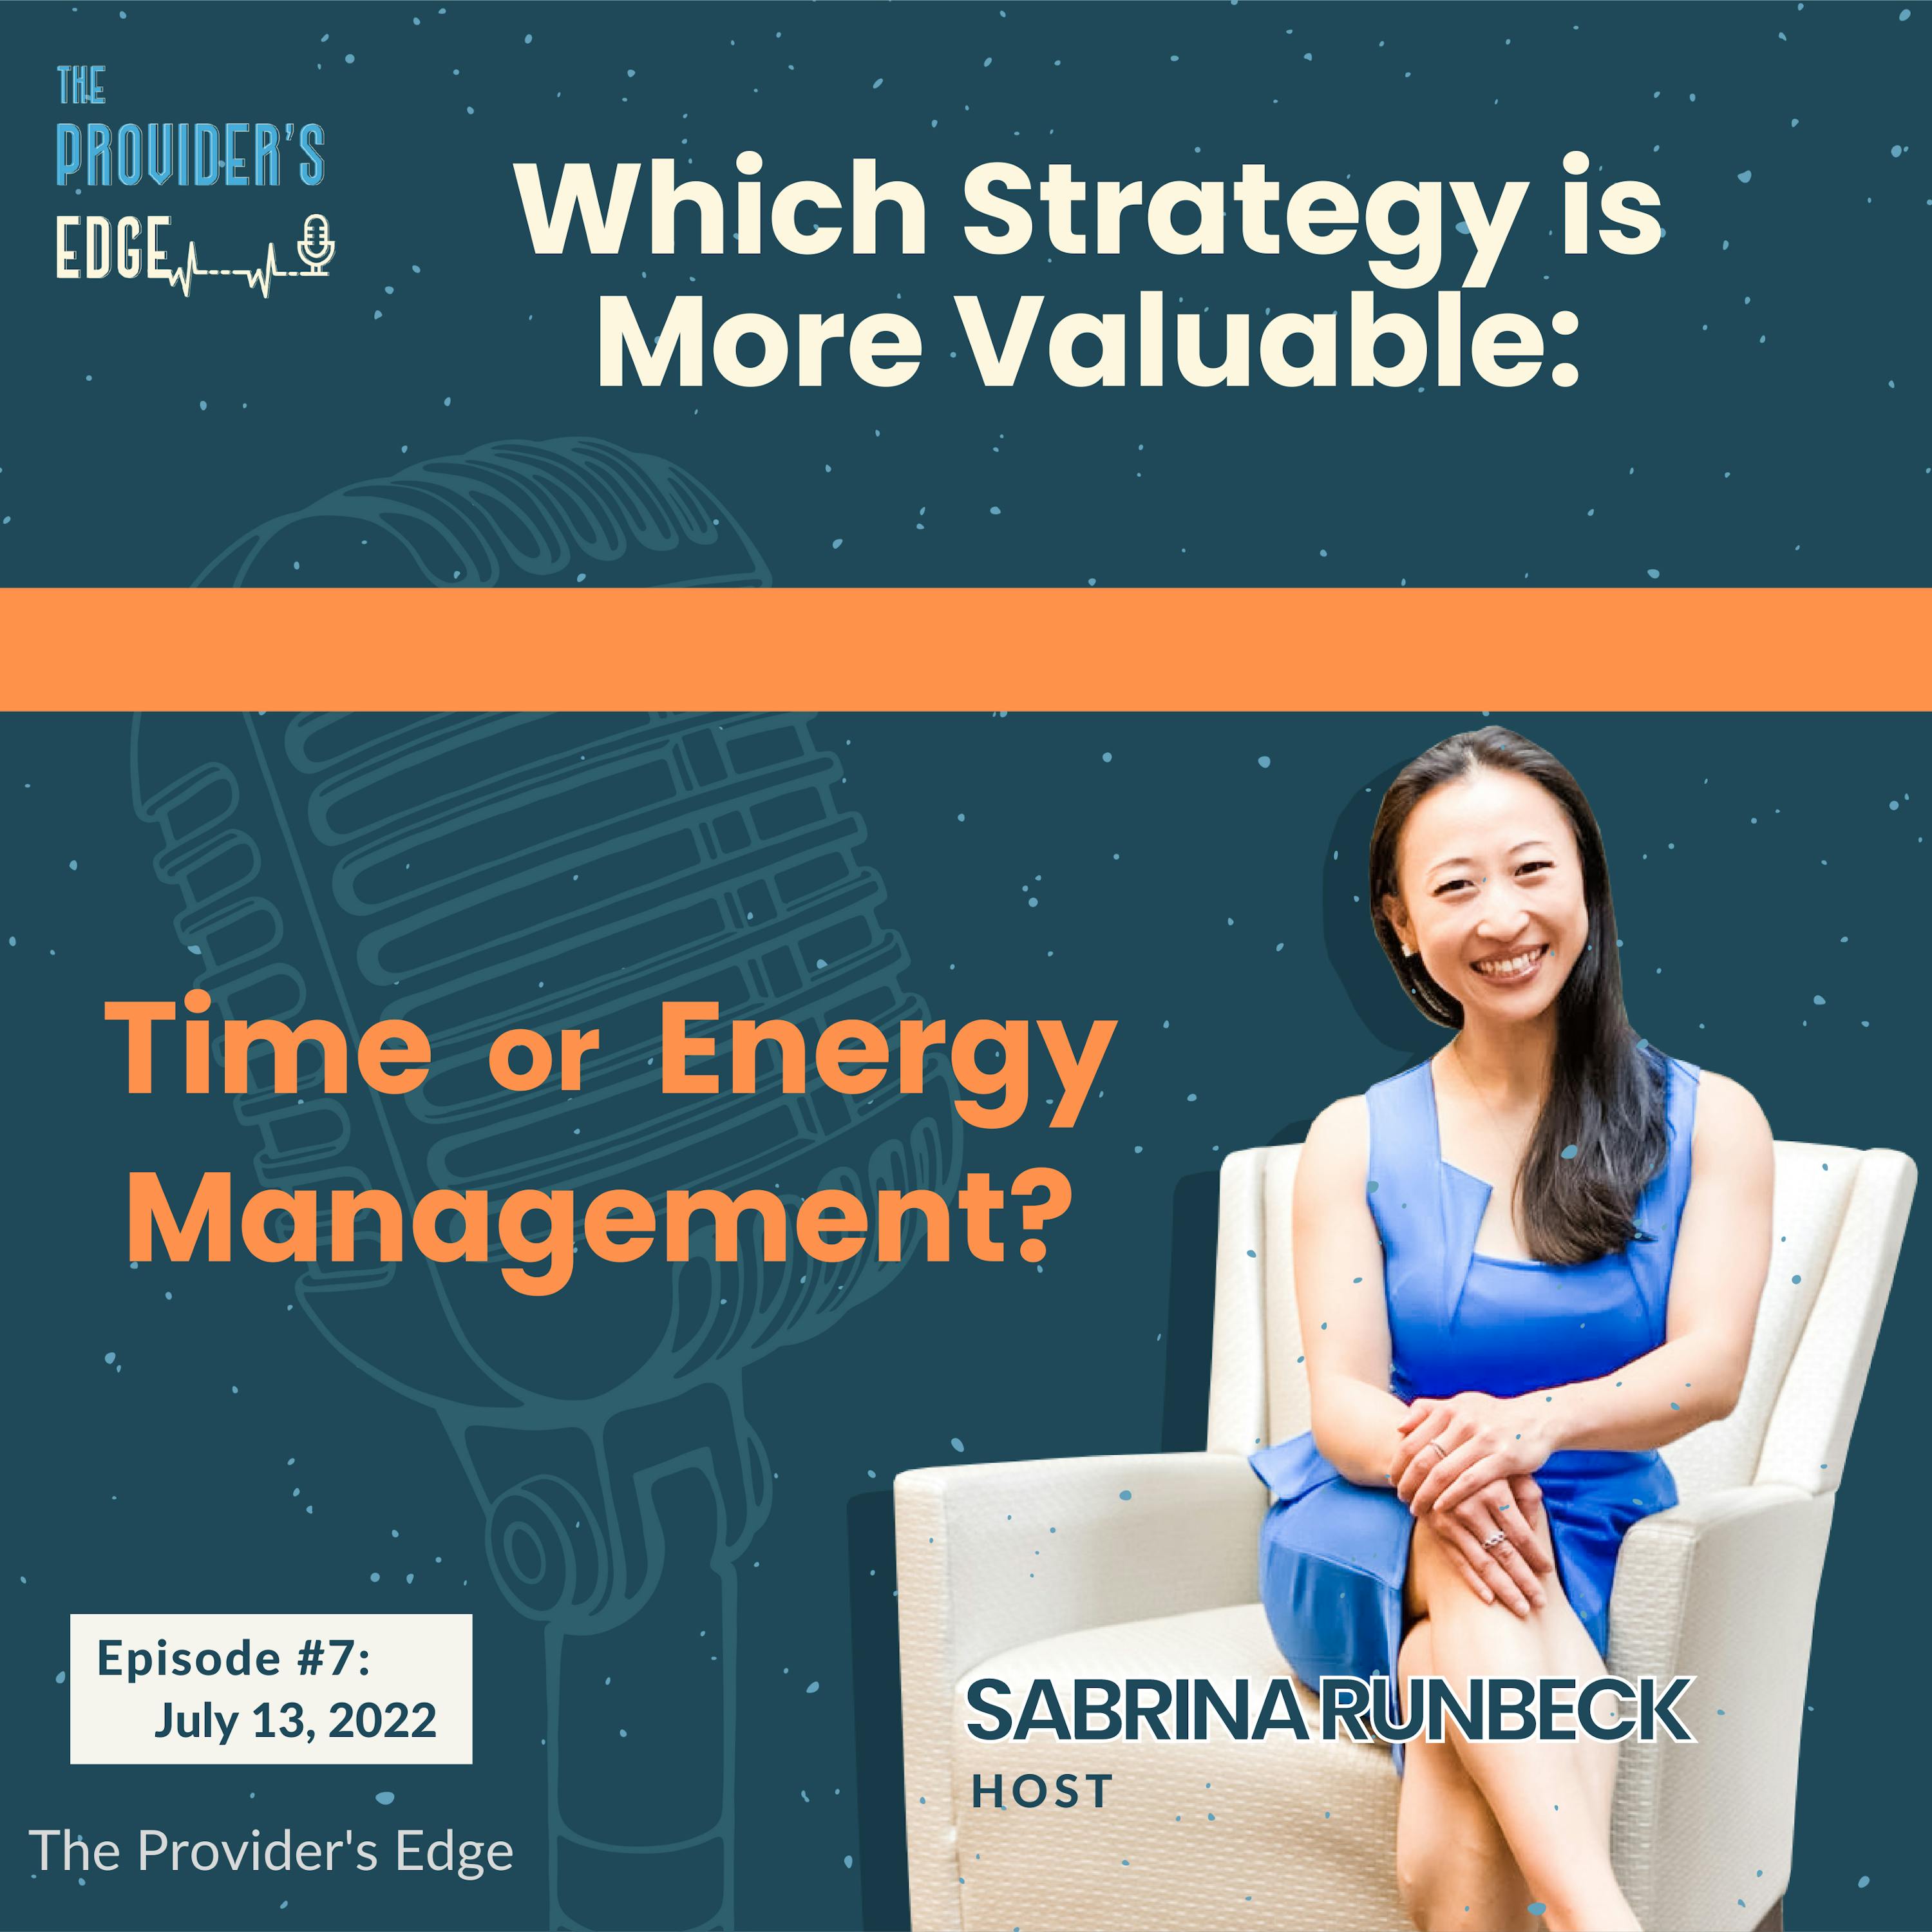 Which strategy is more valuable: time management or energy management?